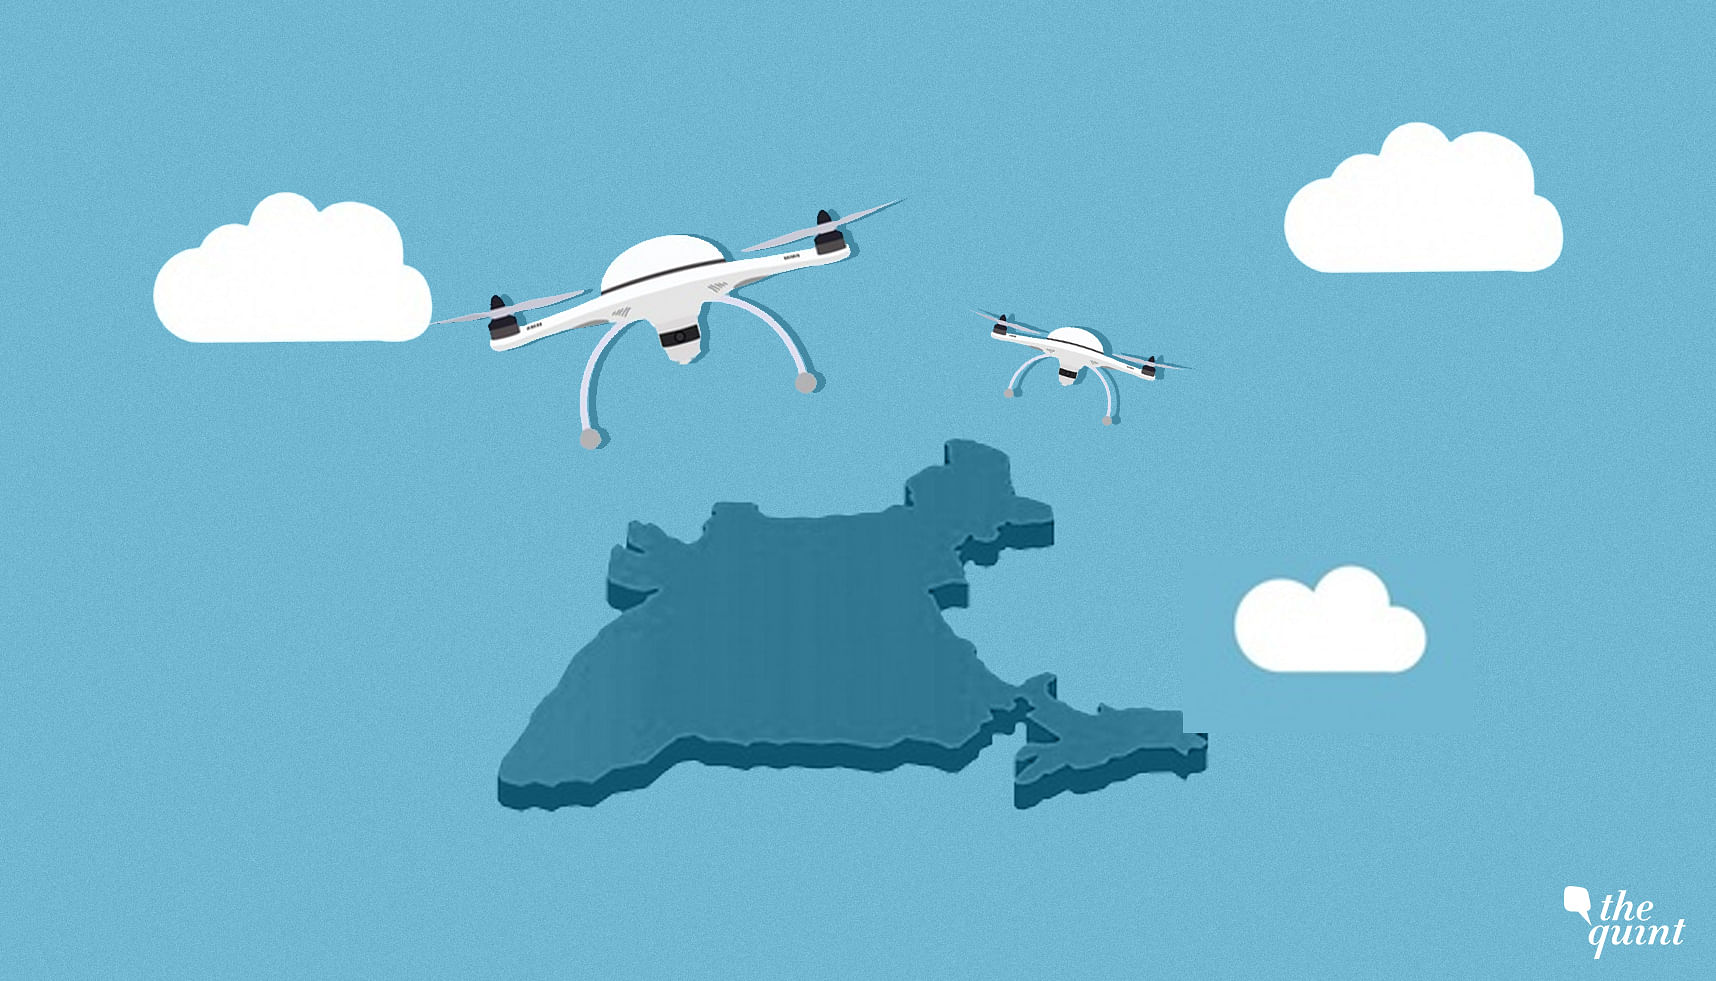 Digital Sky platform intends to digitise the process of taking permission to fly drones.